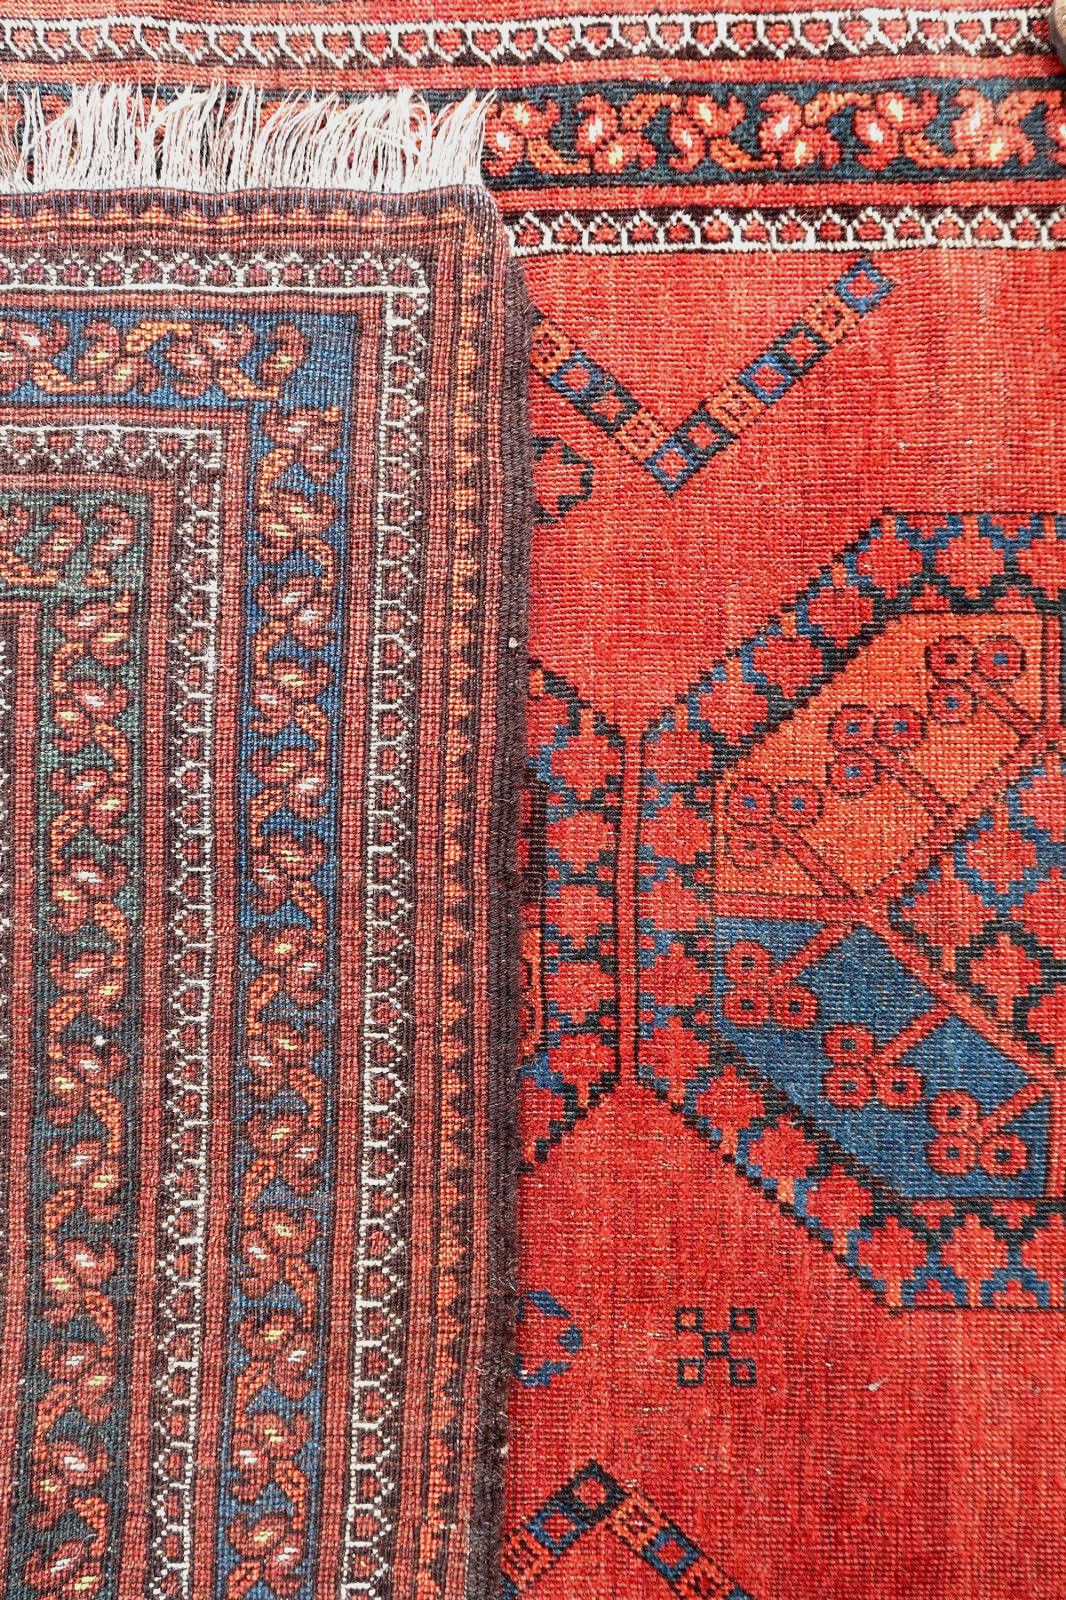 Handmade antique Afghan Baluch rug in traditional elephant feet design. The rug is from the beginning of 20th century in original condition, it has some low pile.